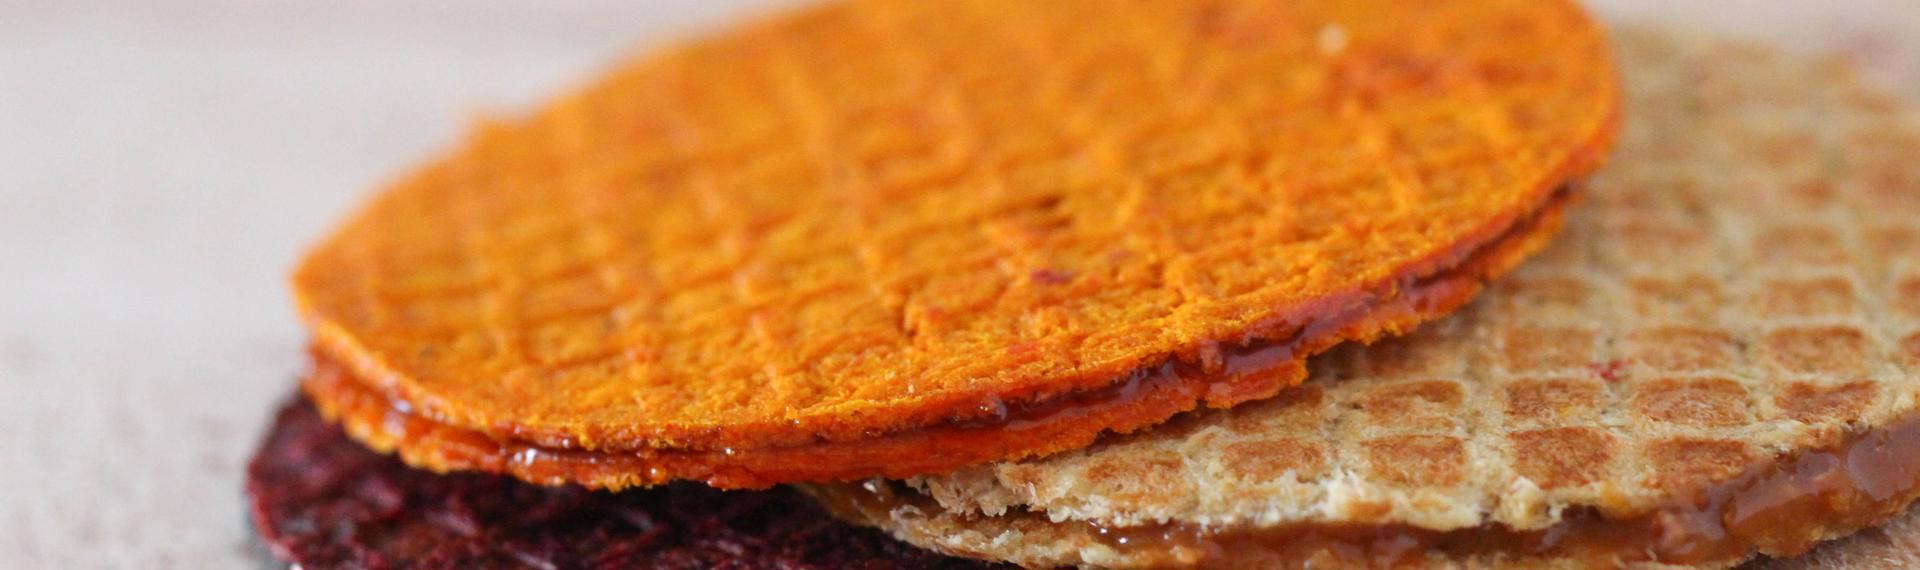 Edible Growth in Eindhoven: stroopwafels of residual products from the vegetable industry